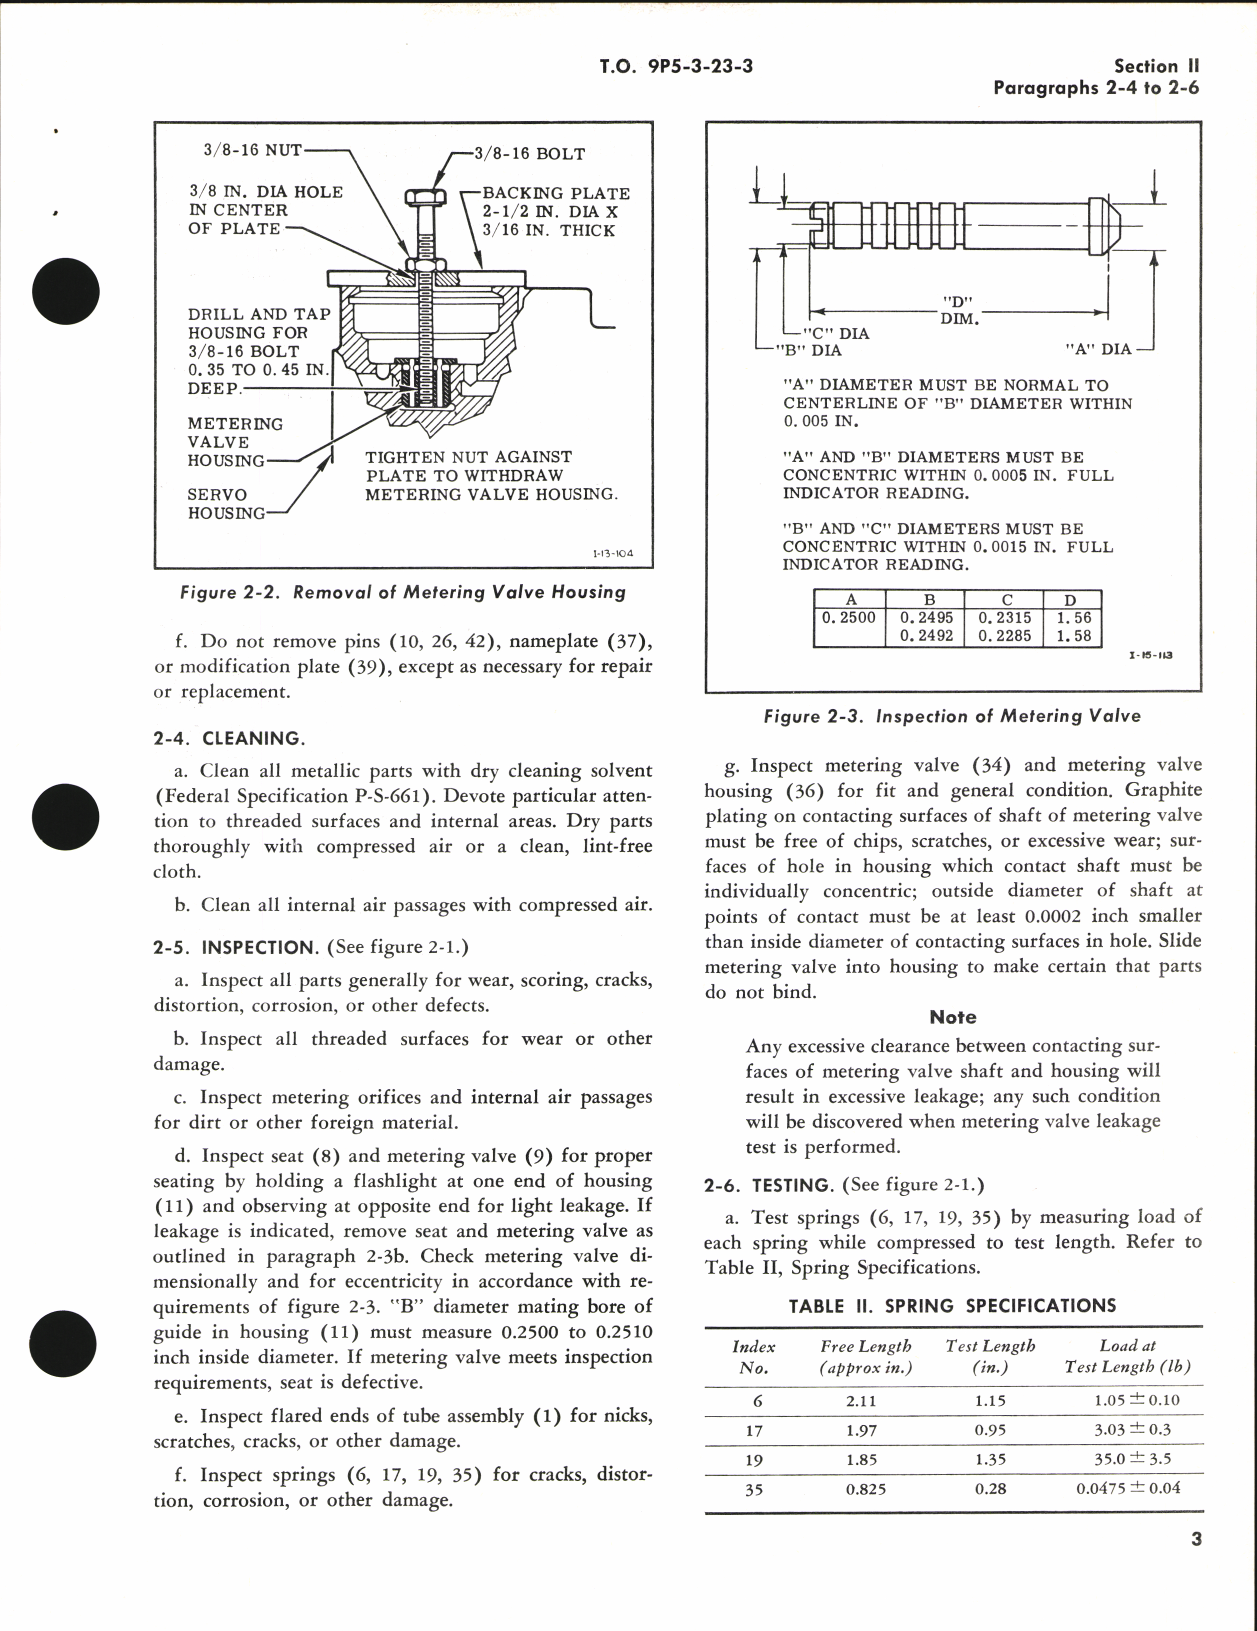 Sample page 7 from AirCorps Library document: Handbook of Overhaul Instructions for Air Pressure Regulators 